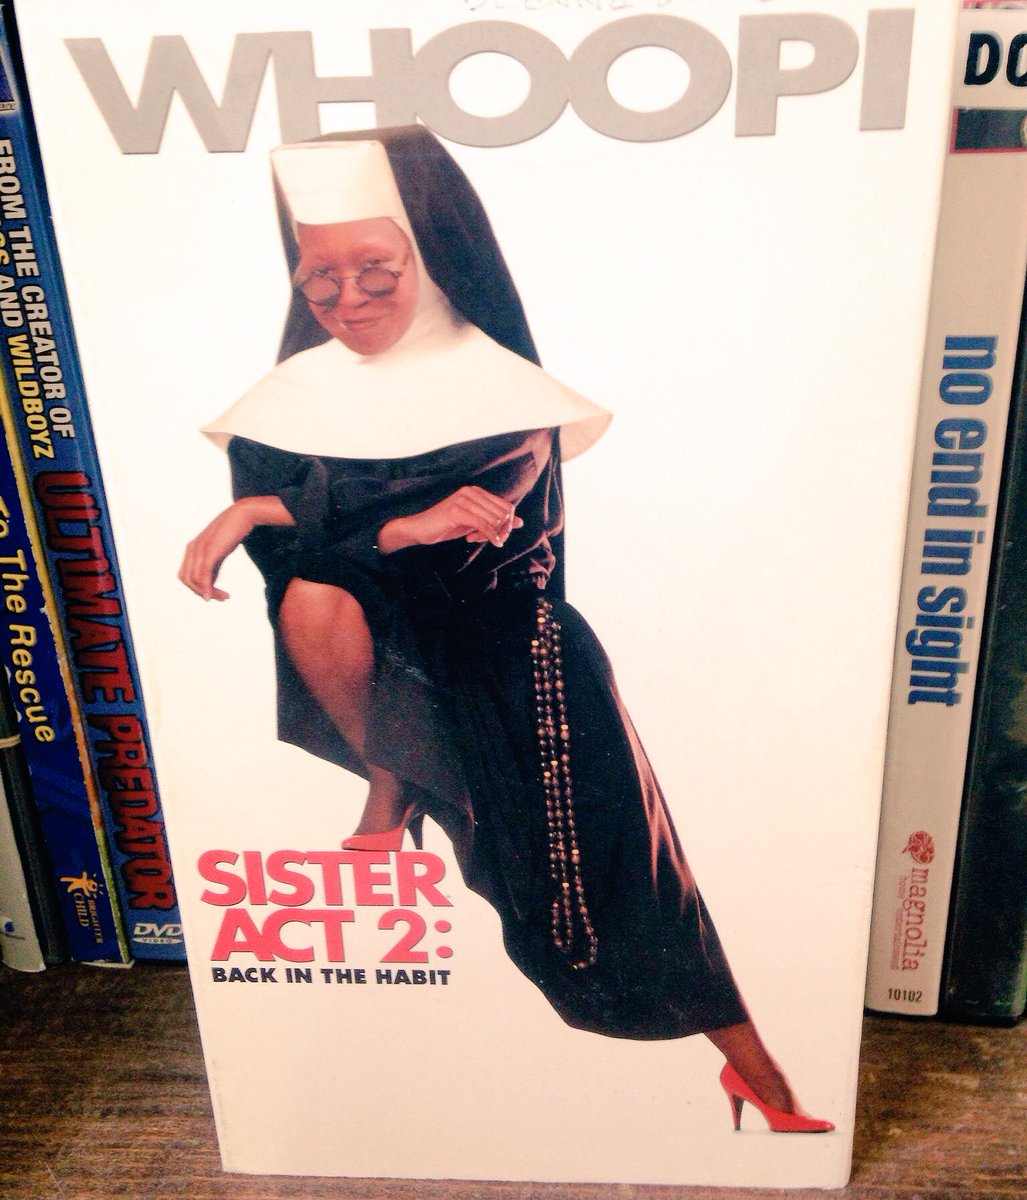 It might be going on 1am but I'm about to watch #SisterAct2BackInTheHabit I'm exhausted, but hey that's how I roll⛪️